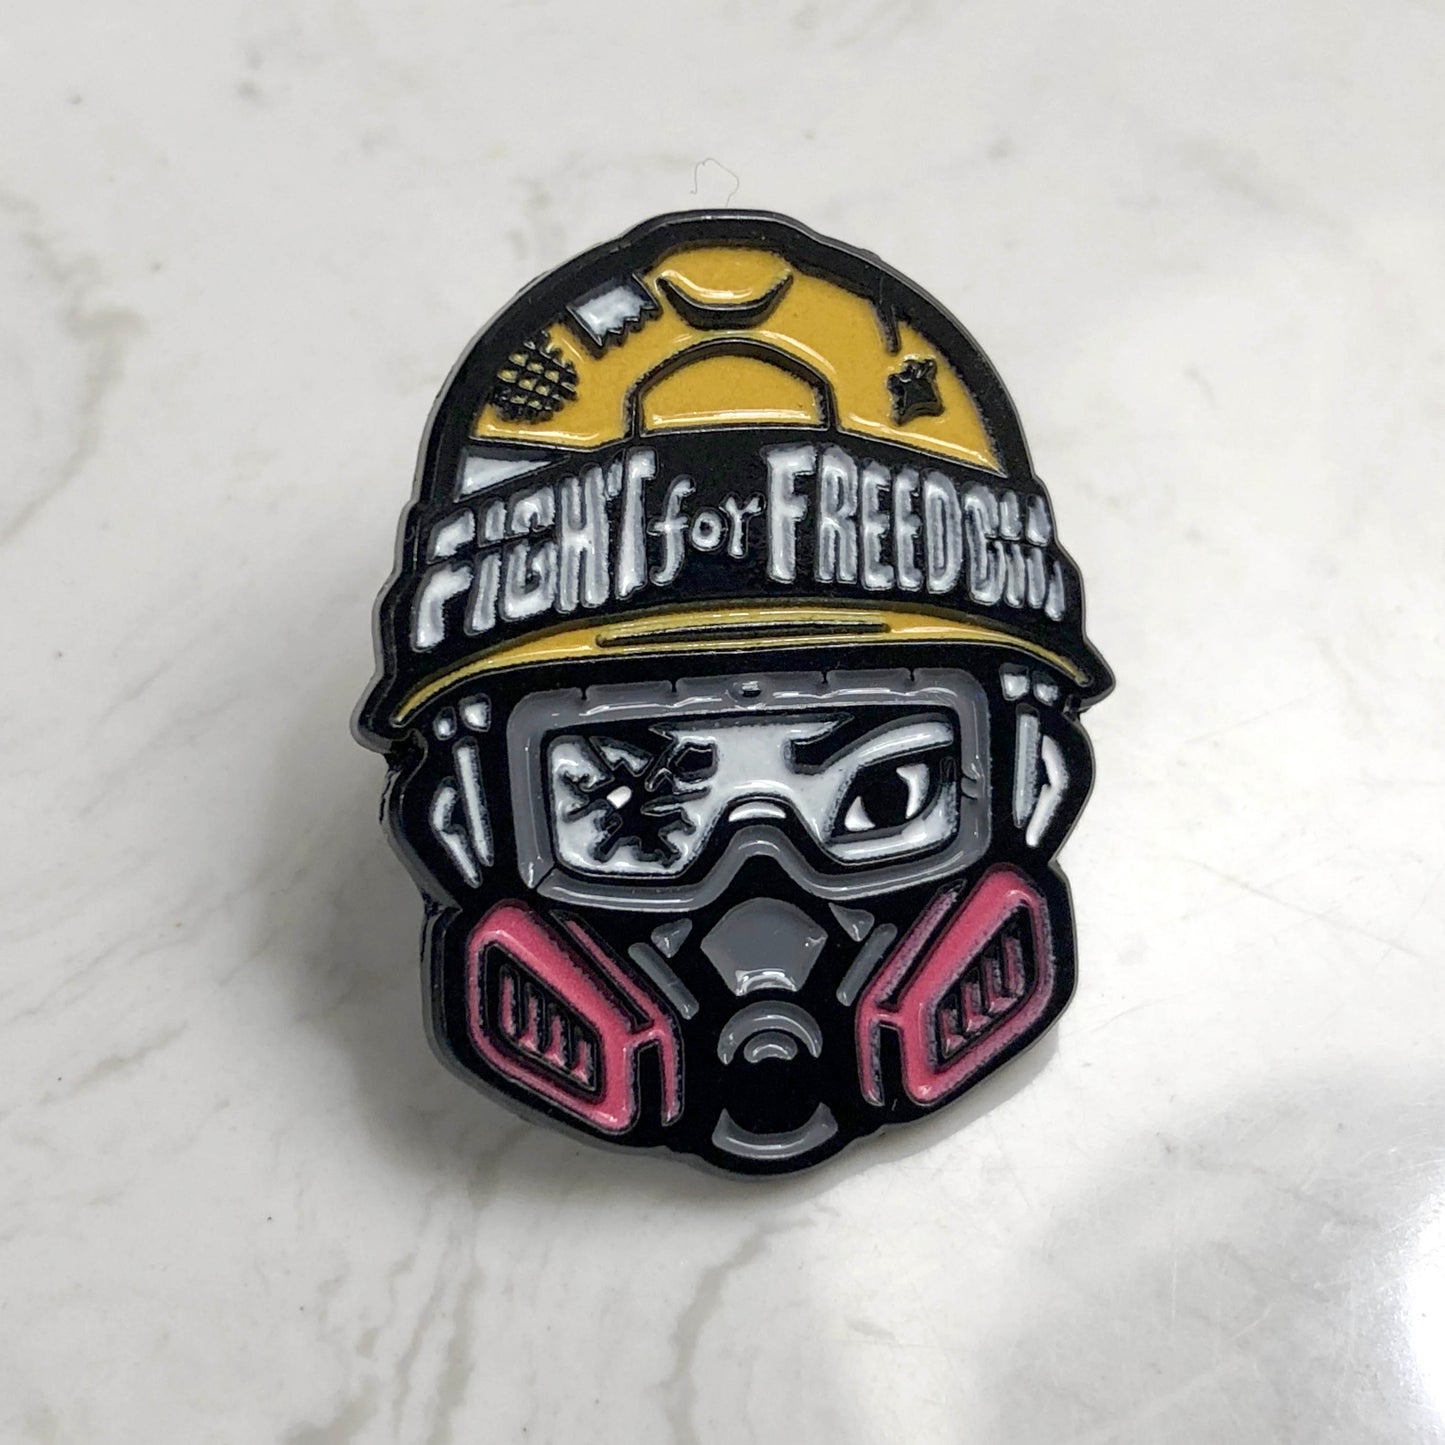 Fight for Freedom 抗爭者襟章 🇹🇼 Made in Taiwan ✨New Arrival✨